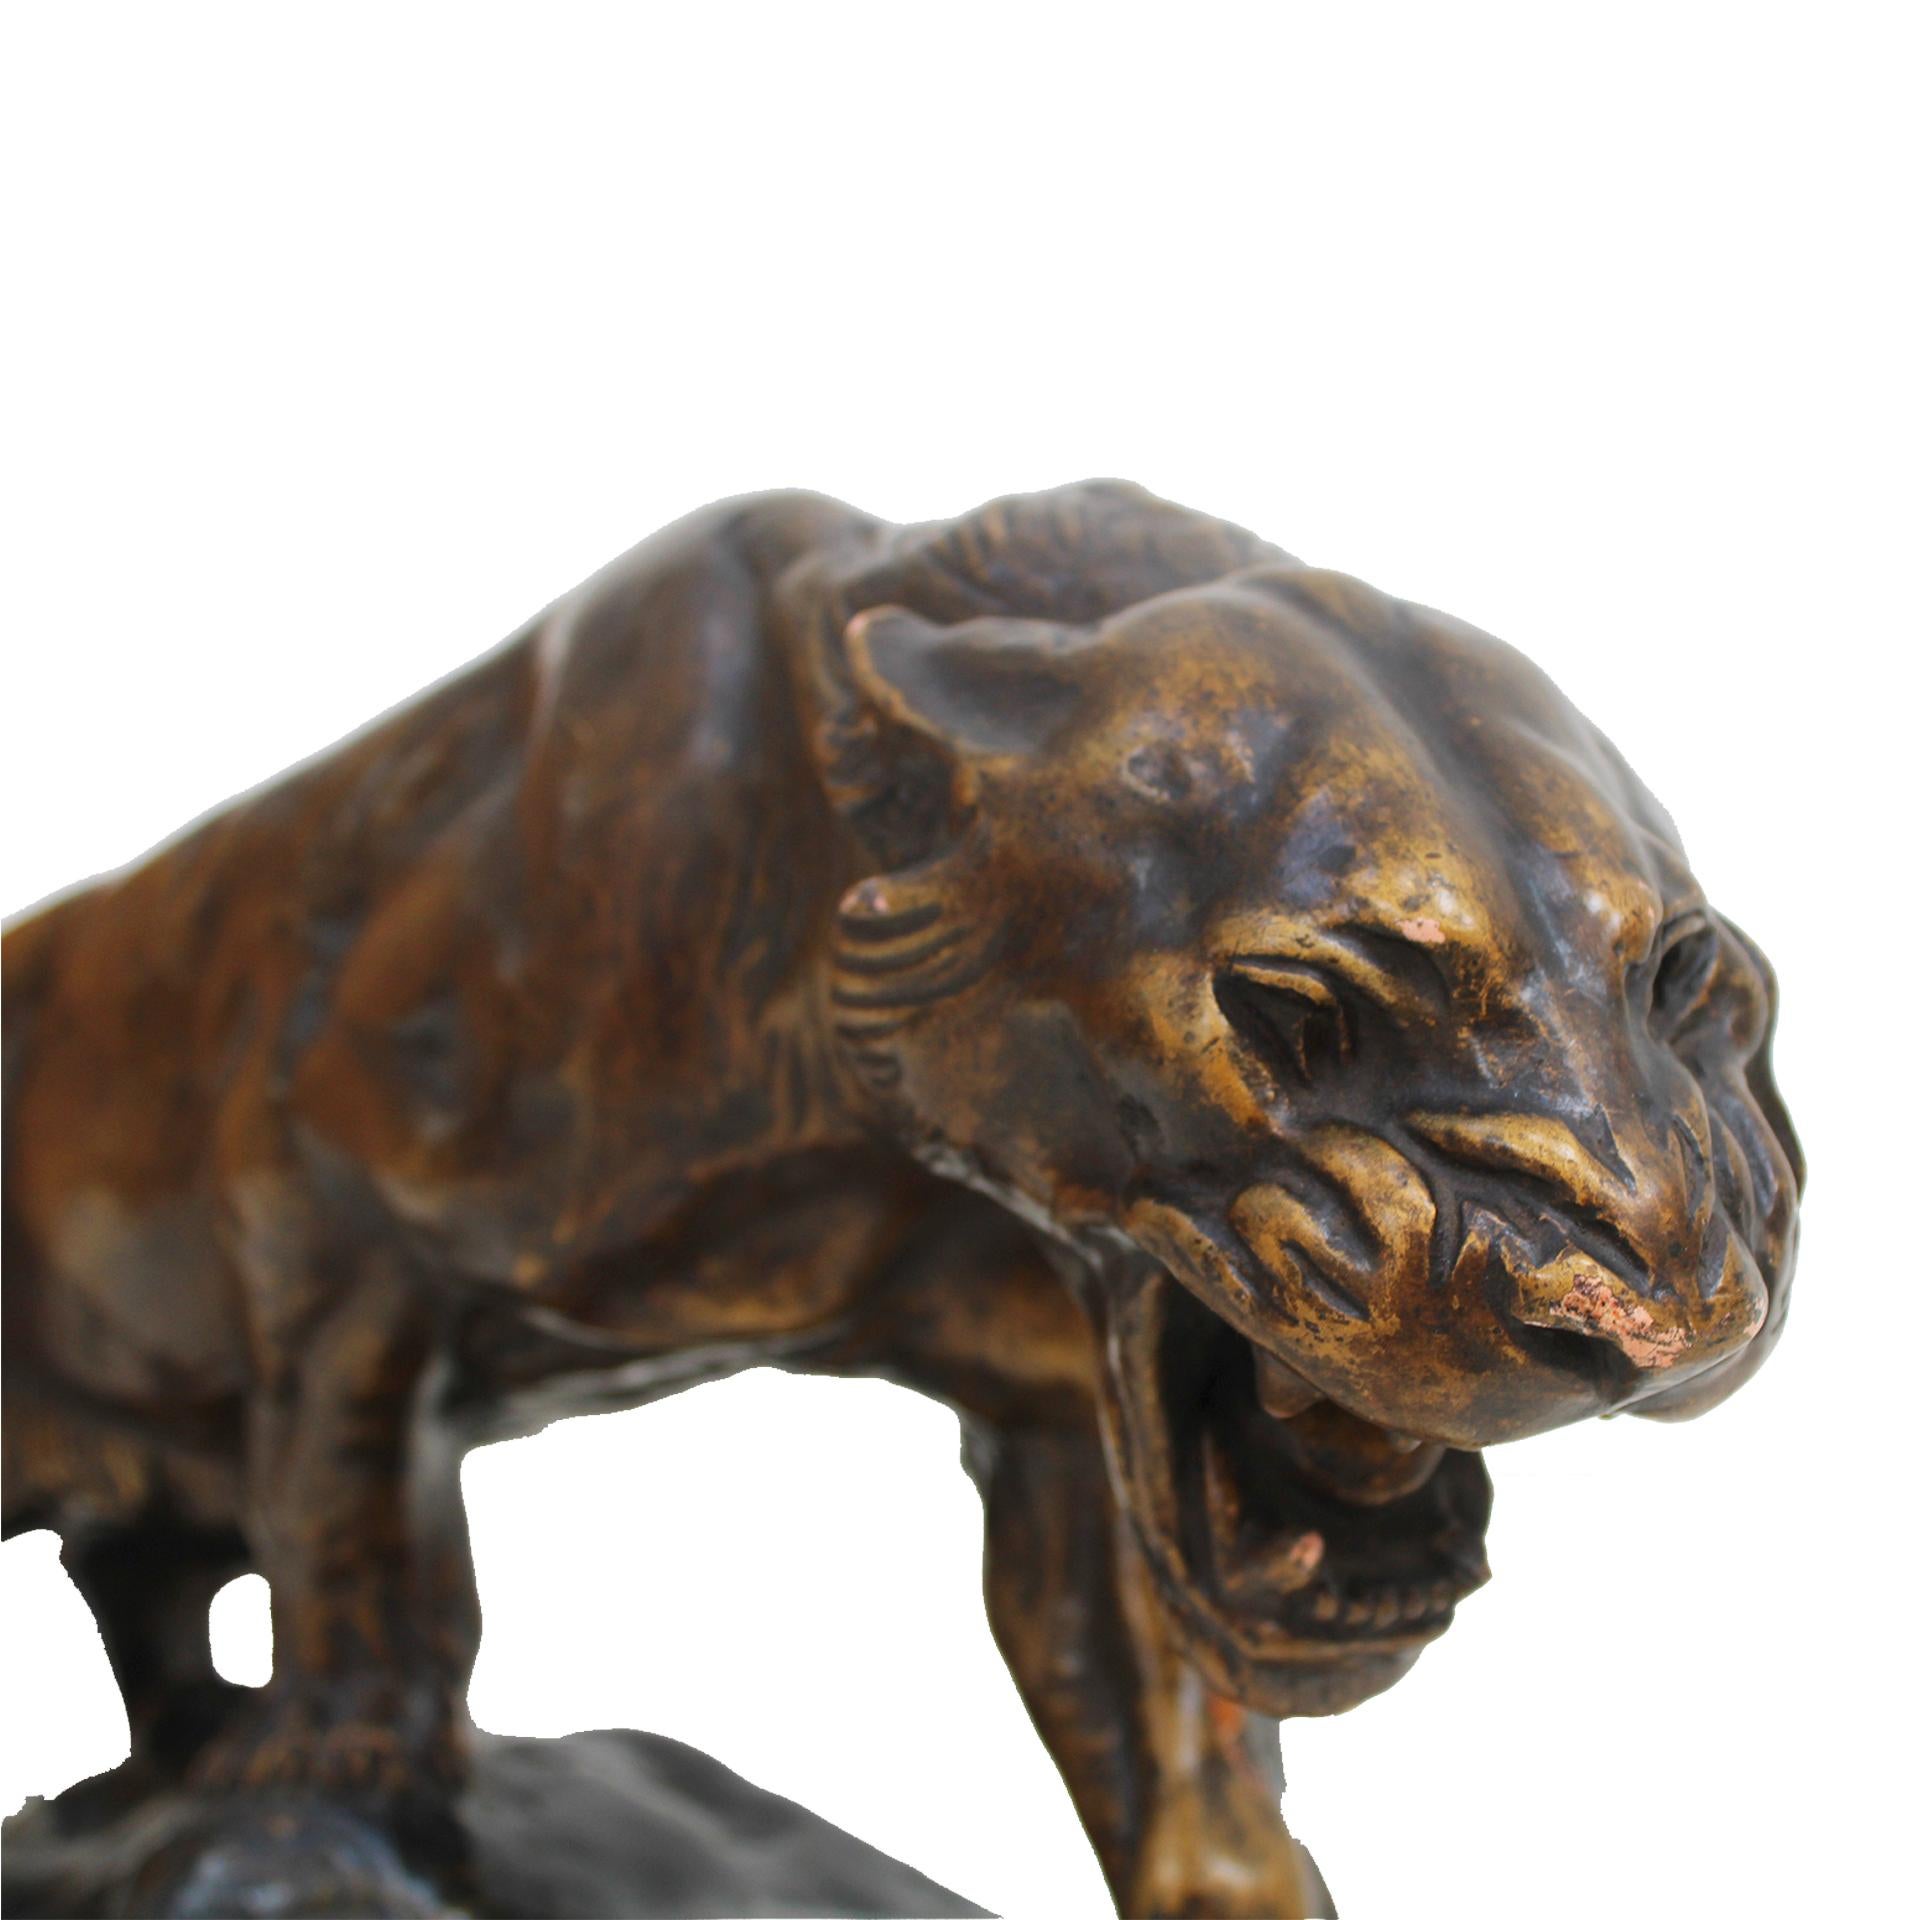 An impressive sculpture of Thomas François Cartier (1879-1943), of a lioness, roaring. The sculpture is made of bronze patinated and is signed T. CARTIER on the terrace.

Every item LA Studio offers is checked by our team of 10 craftsmen in our